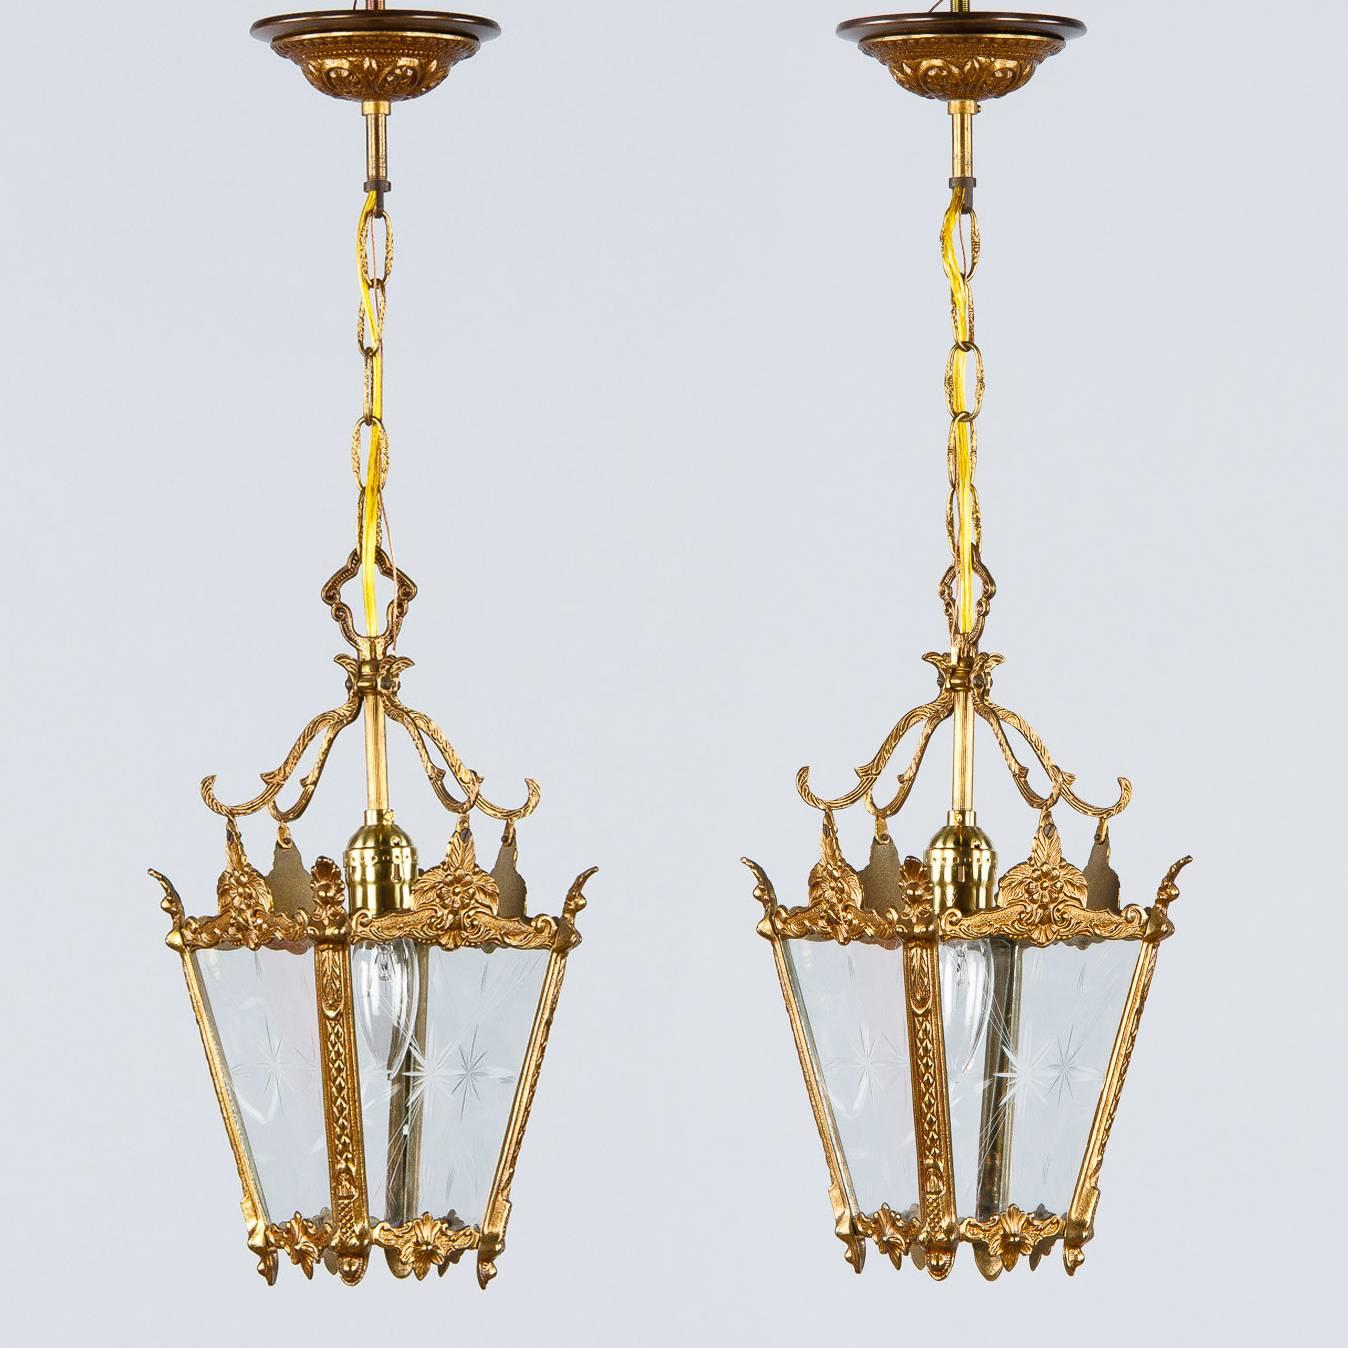 A pair of small Mid-Century French Lanterns made of ciseled brass with delicate designs of flowers and waterleaves. The etched glass panels have star motifs. Each lantern is housing a medium size light bulb, up to 100 watts each. The chain and